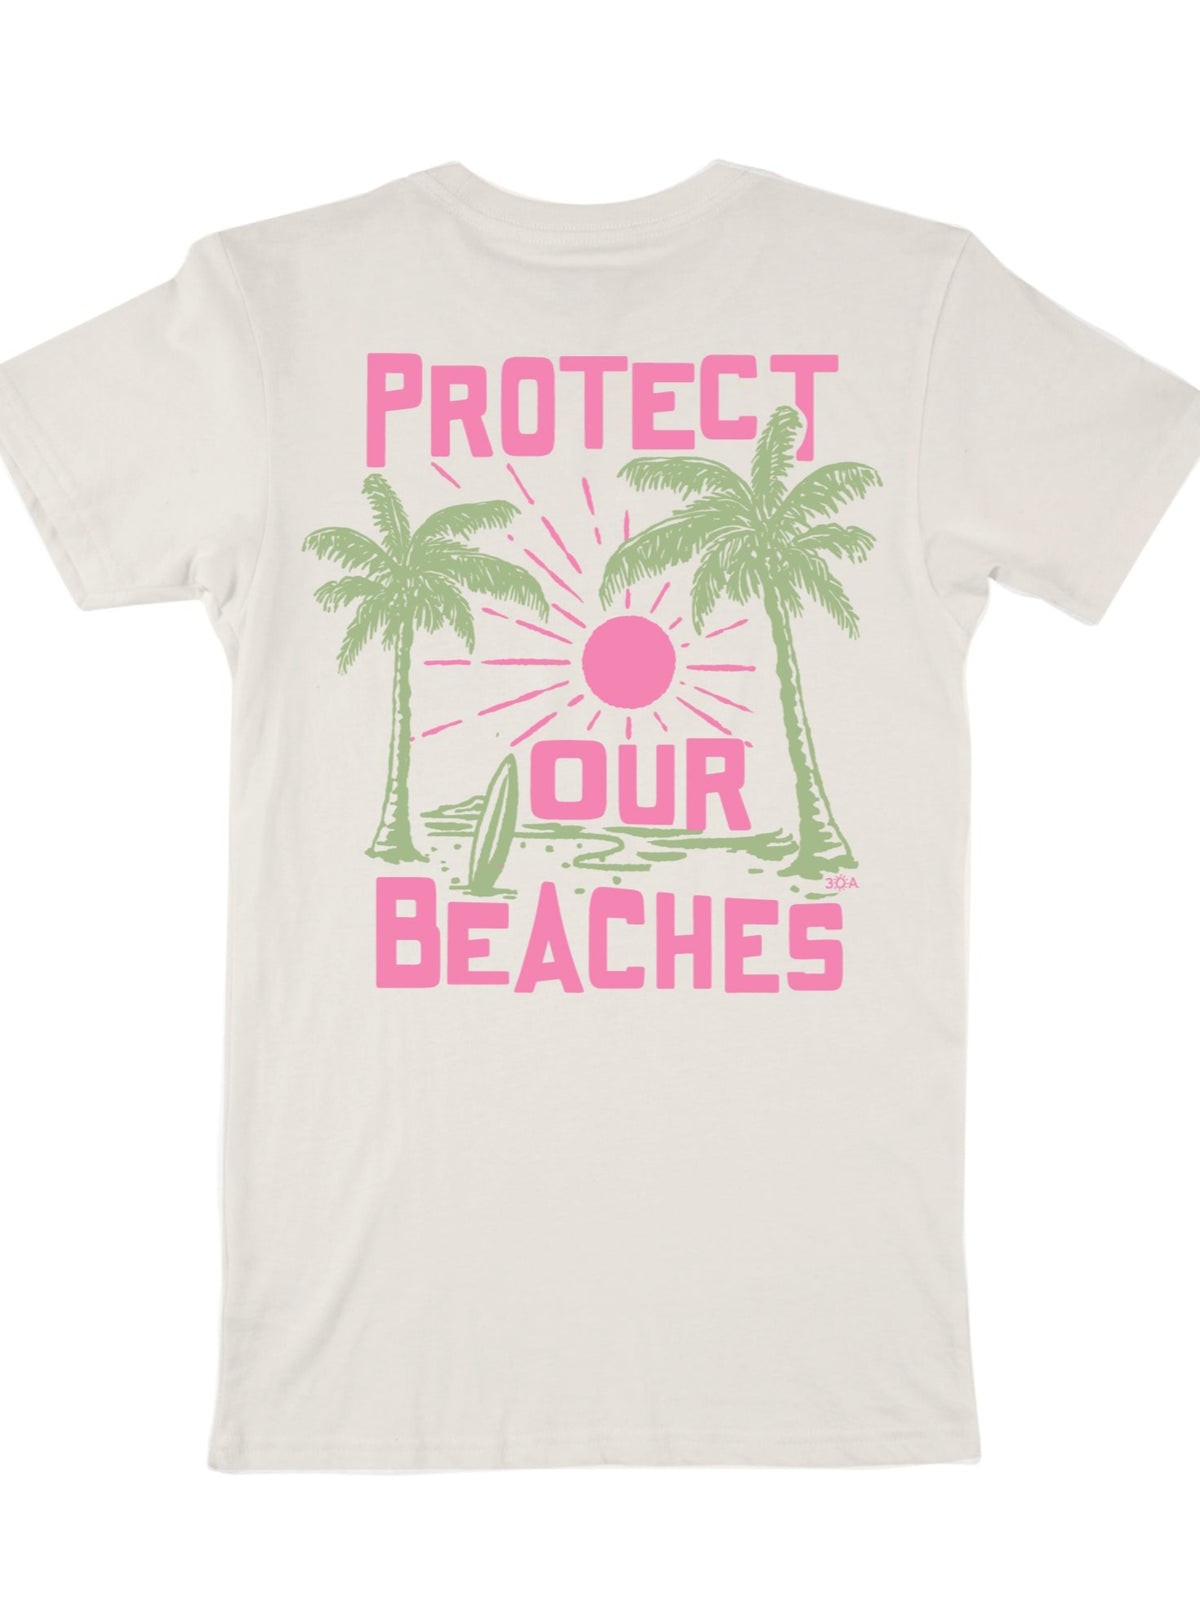 Tropical Protect Our Beaches T-Shirt